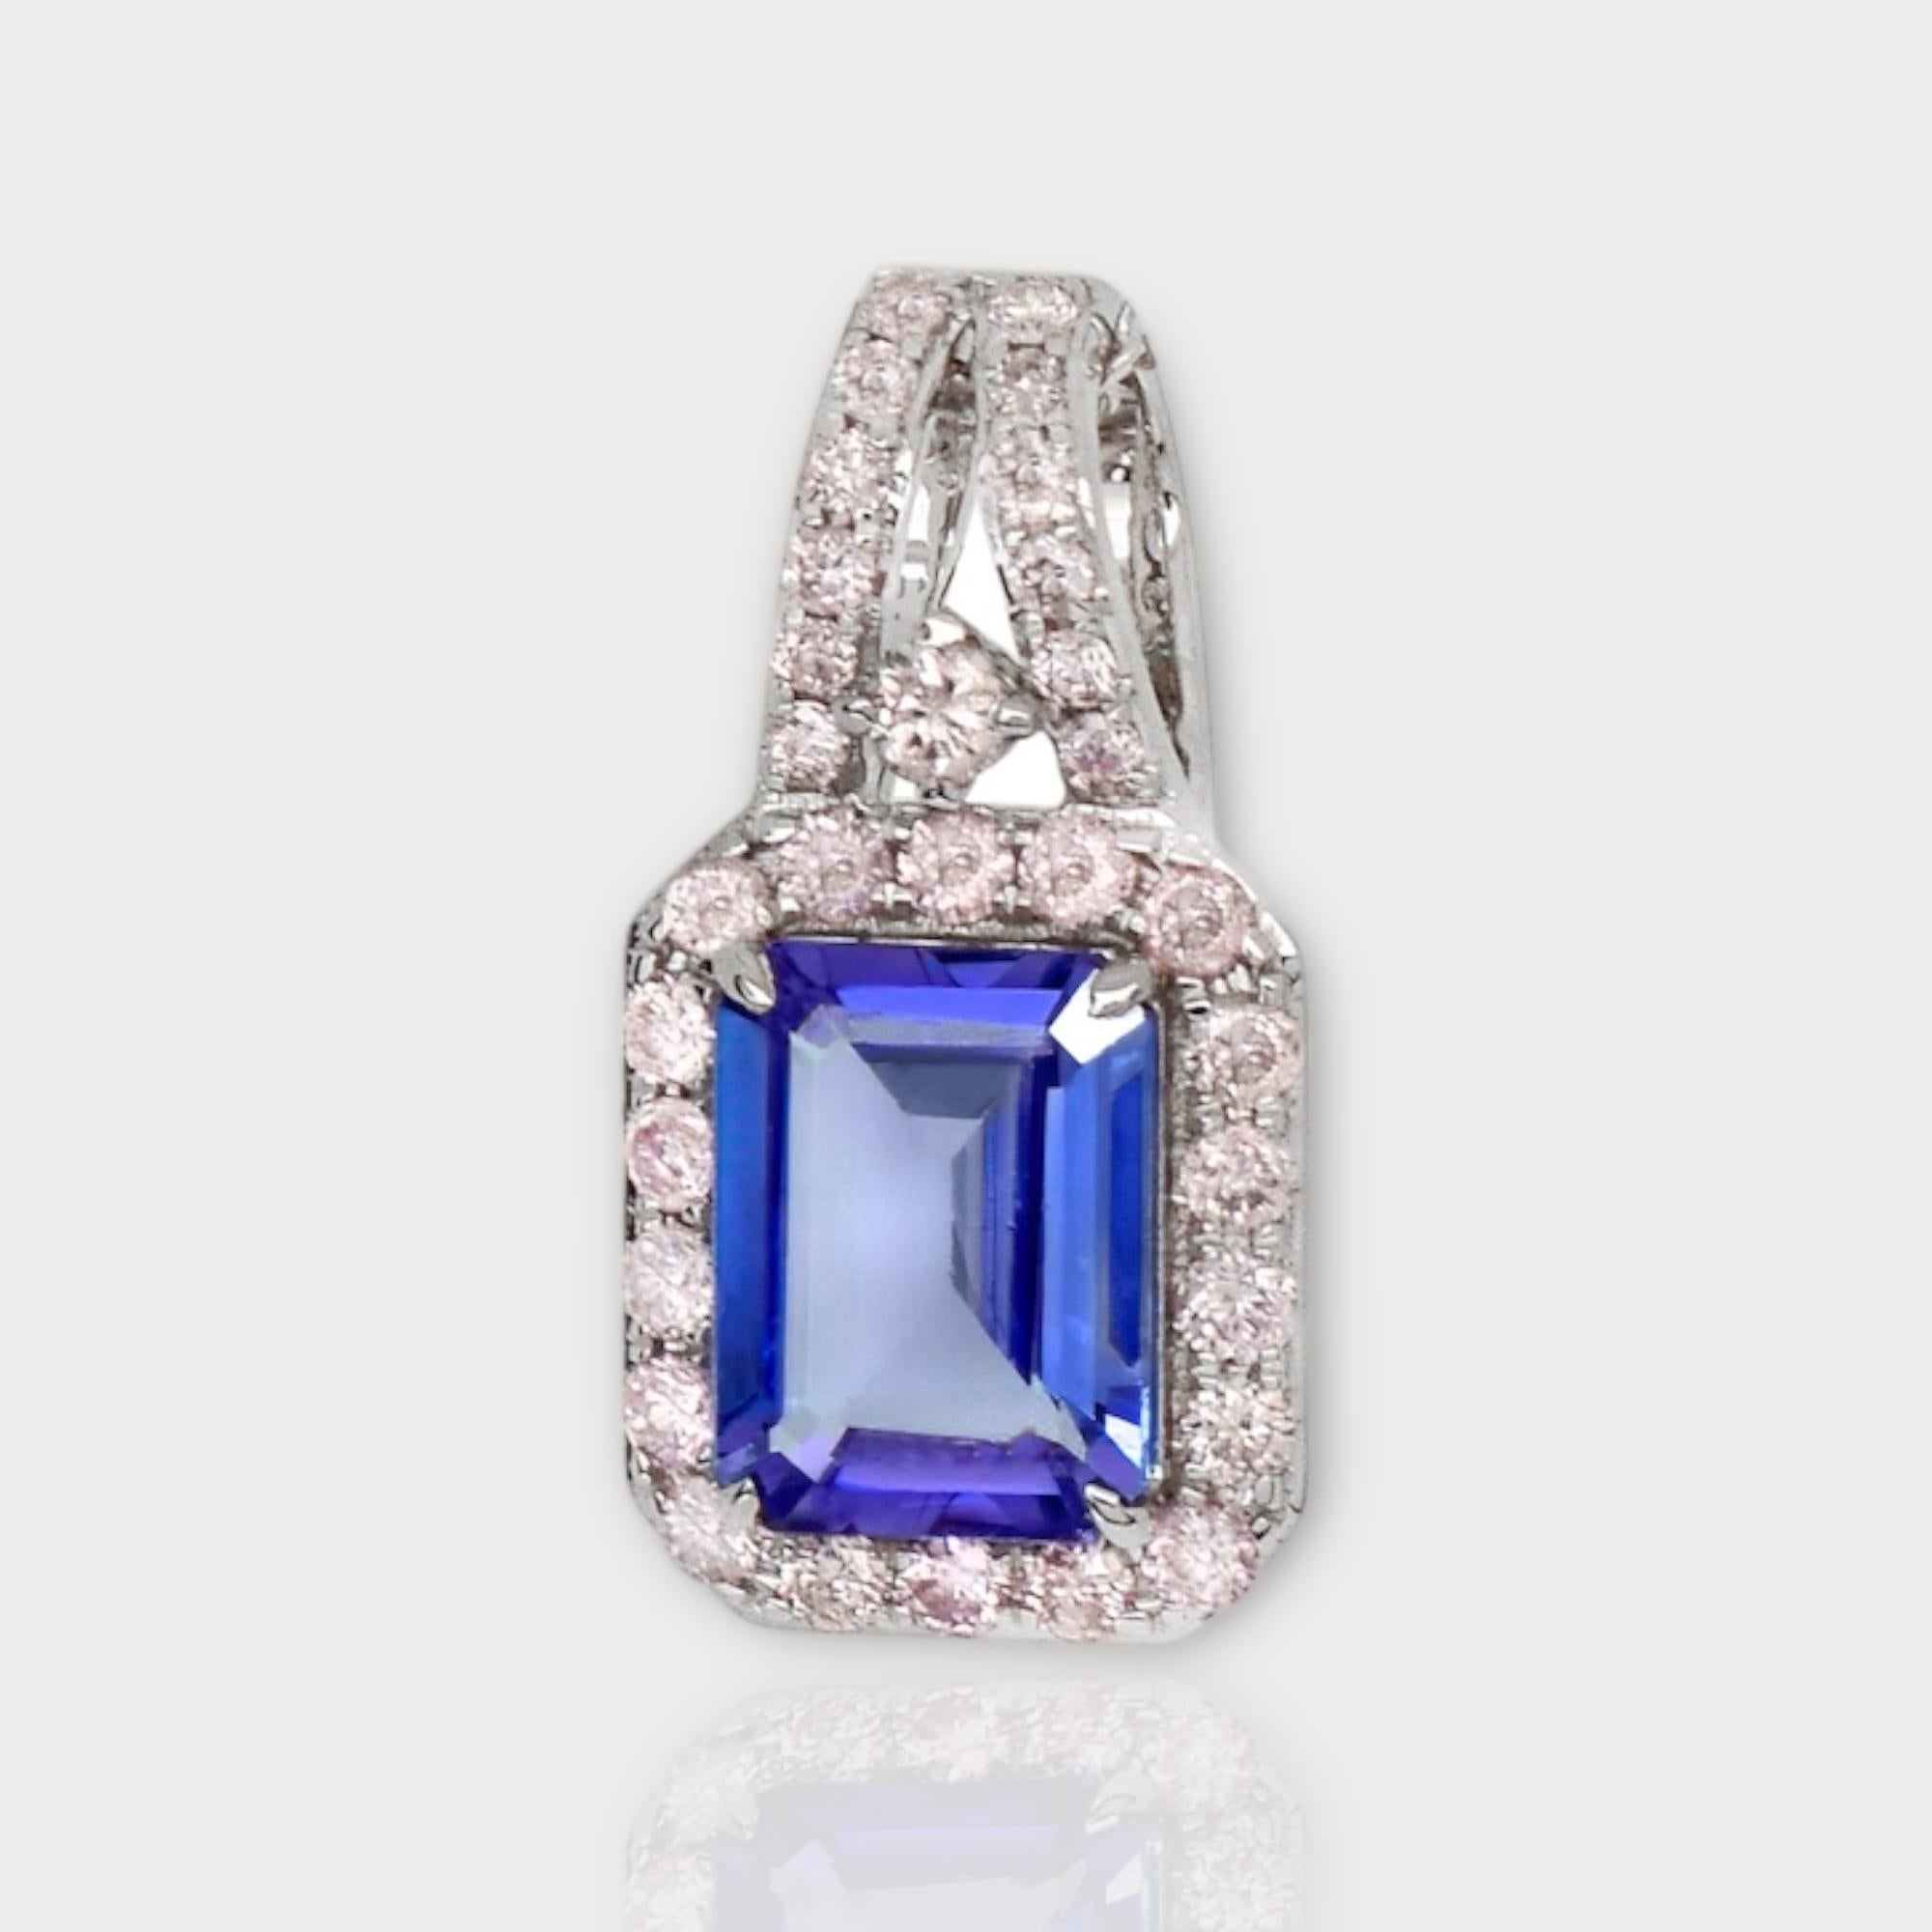 IGI 14K 1.57 ct Tanzanite&Pink Diamond Antique Pendant Necklace In New Condition For Sale In Kaohsiung City, TW